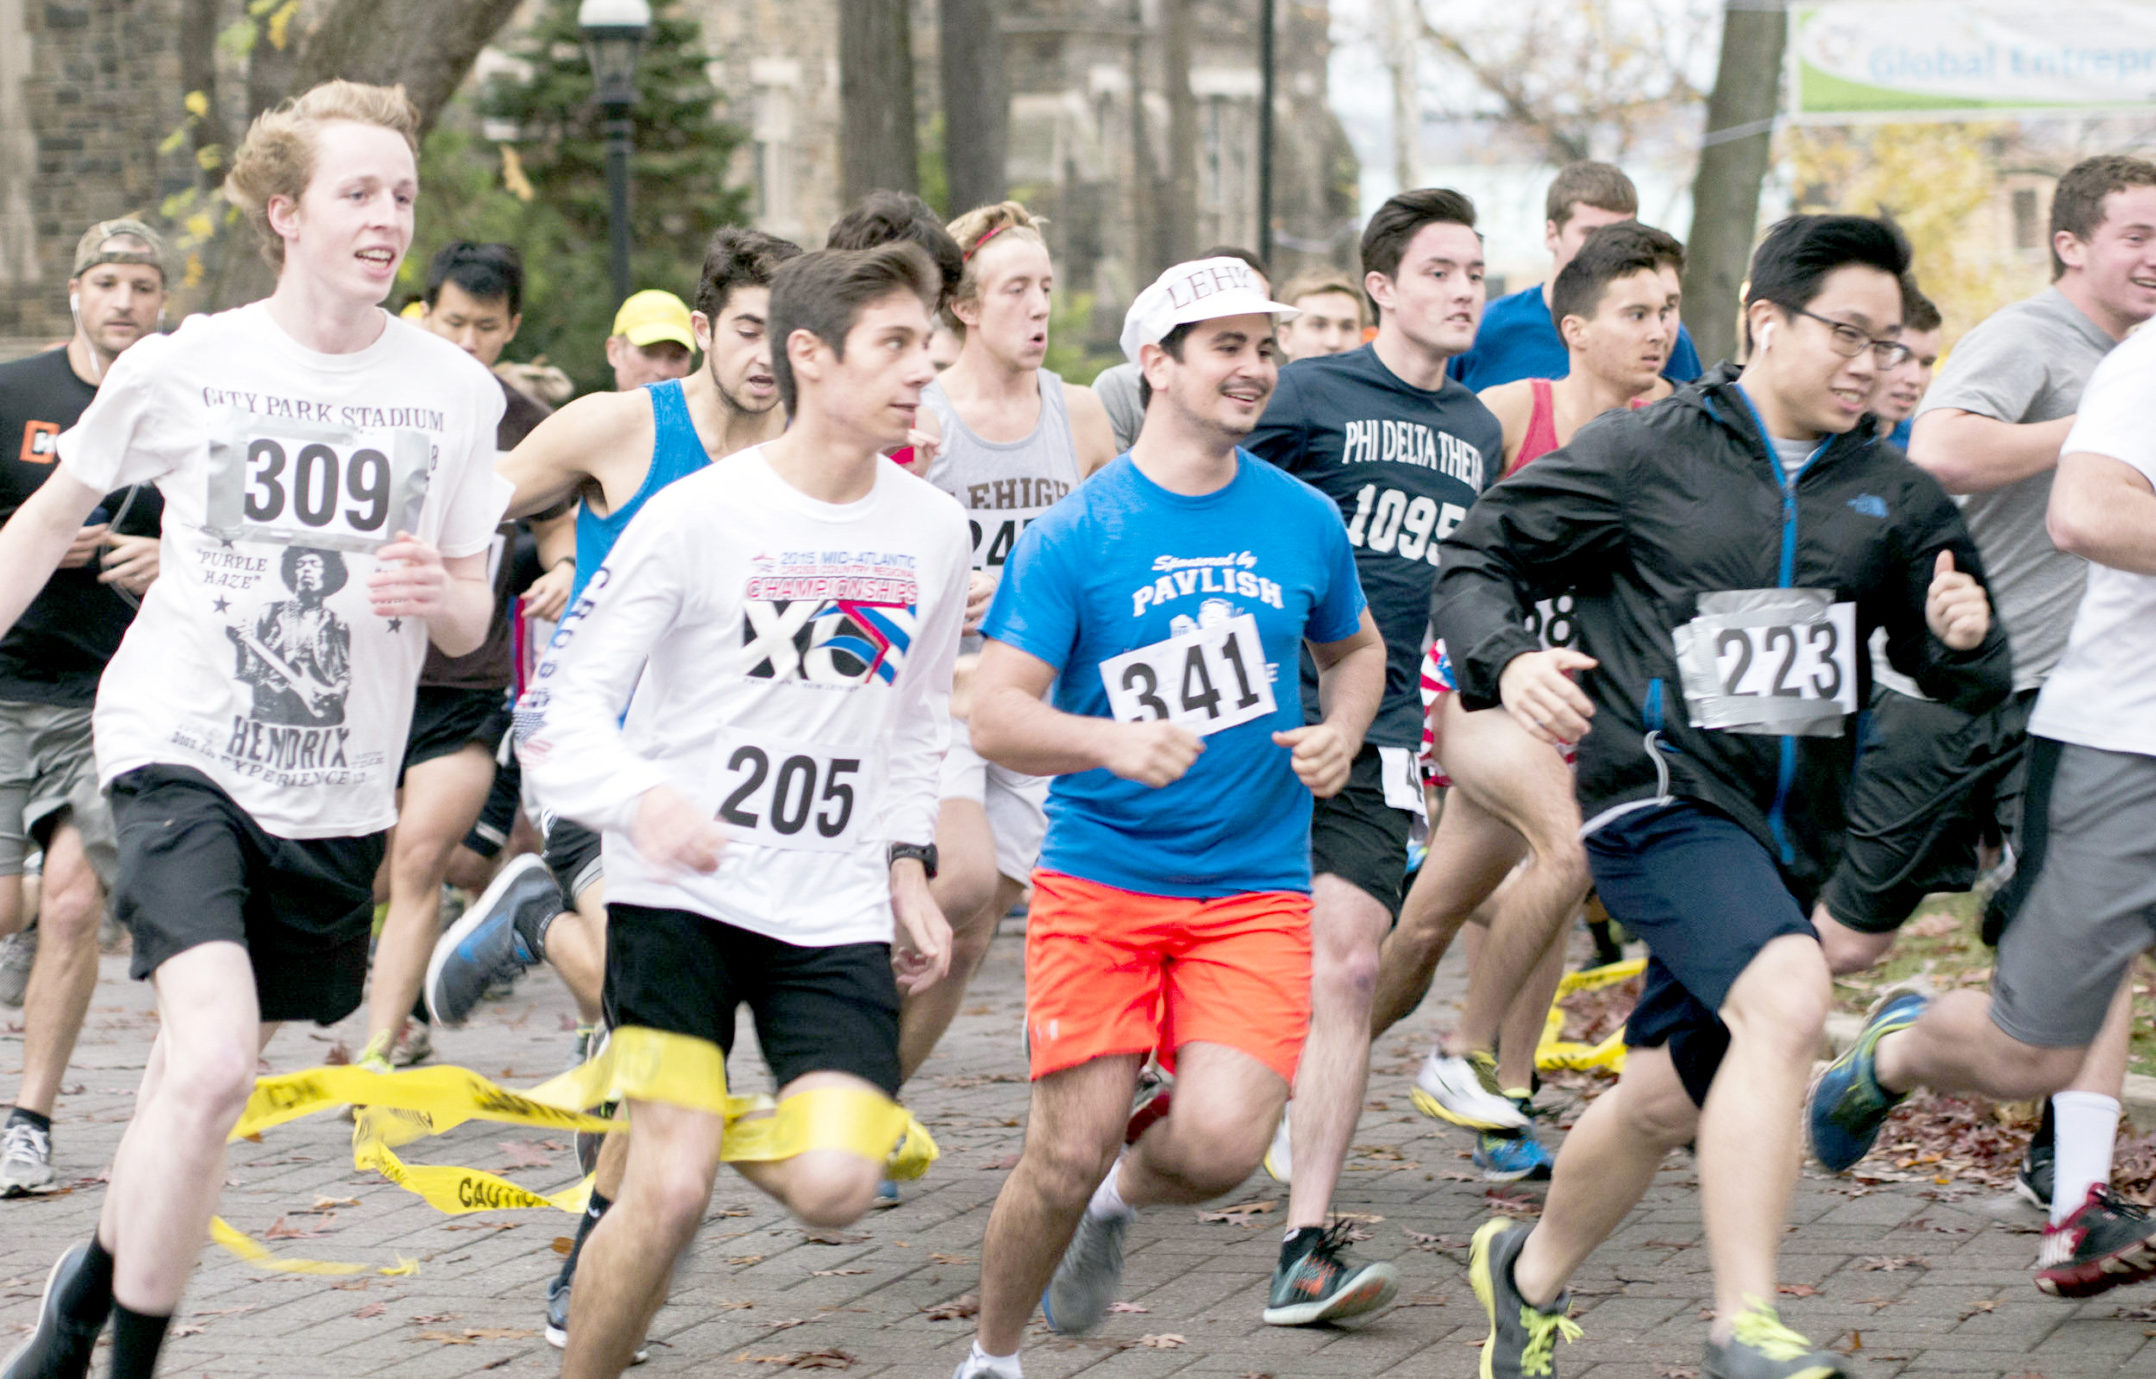 Annual Turkey Trot Has Indoor Options Breaking Decades Of Tradition The Brown And White